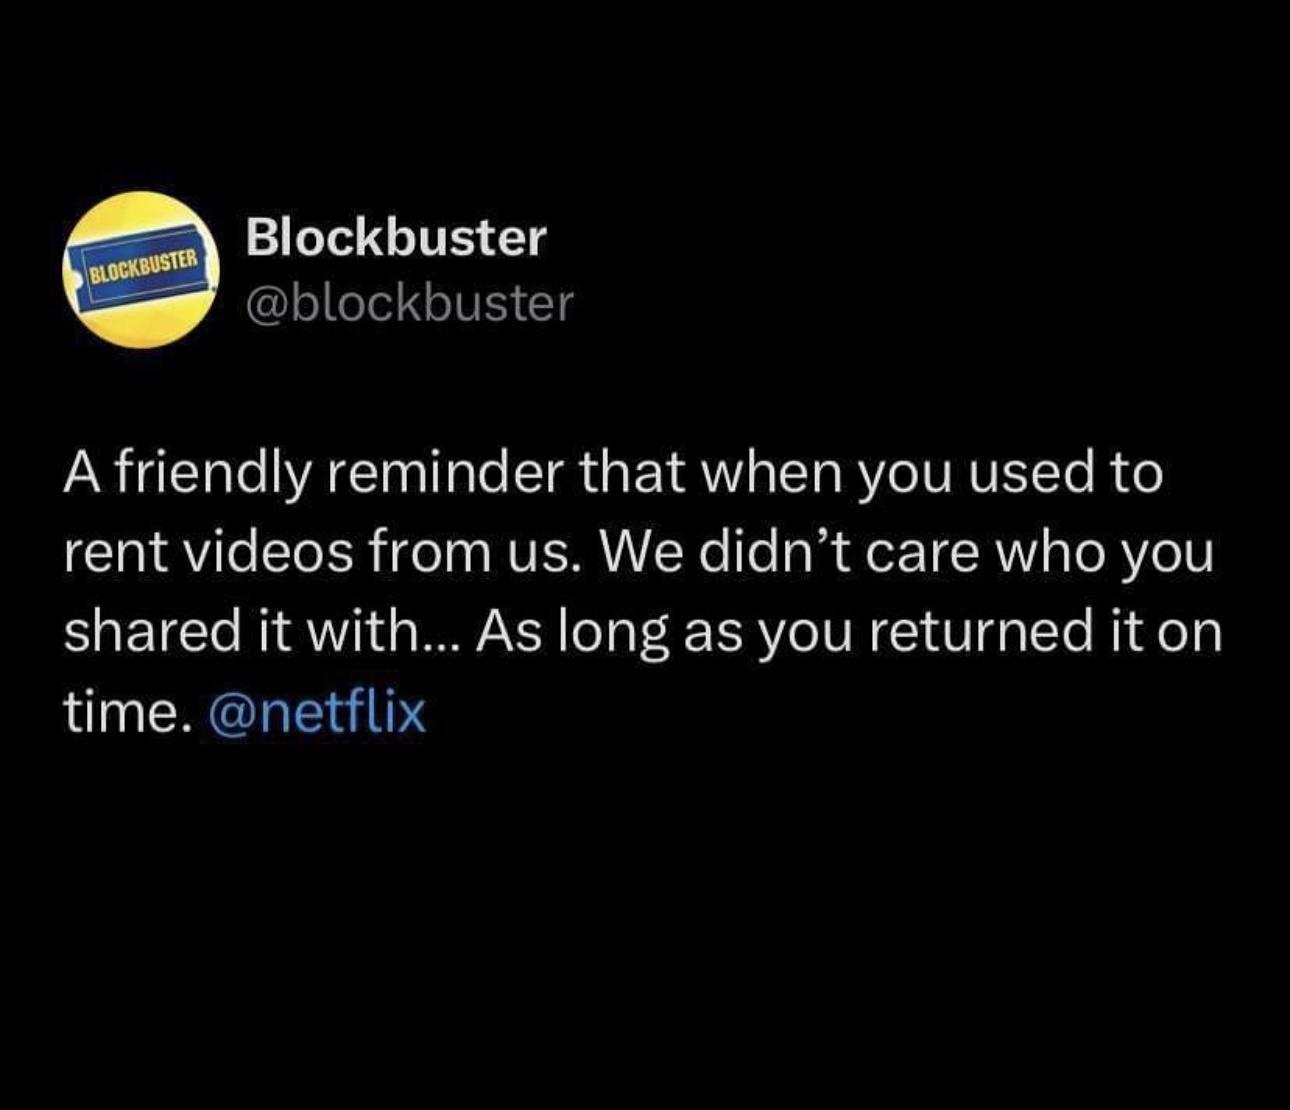 funny memes - screenshot - Blockbuster Blockbuster A friendly reminder that when you used to rent videos from us. We didn't care who you d it with... As long as you returned it on time.